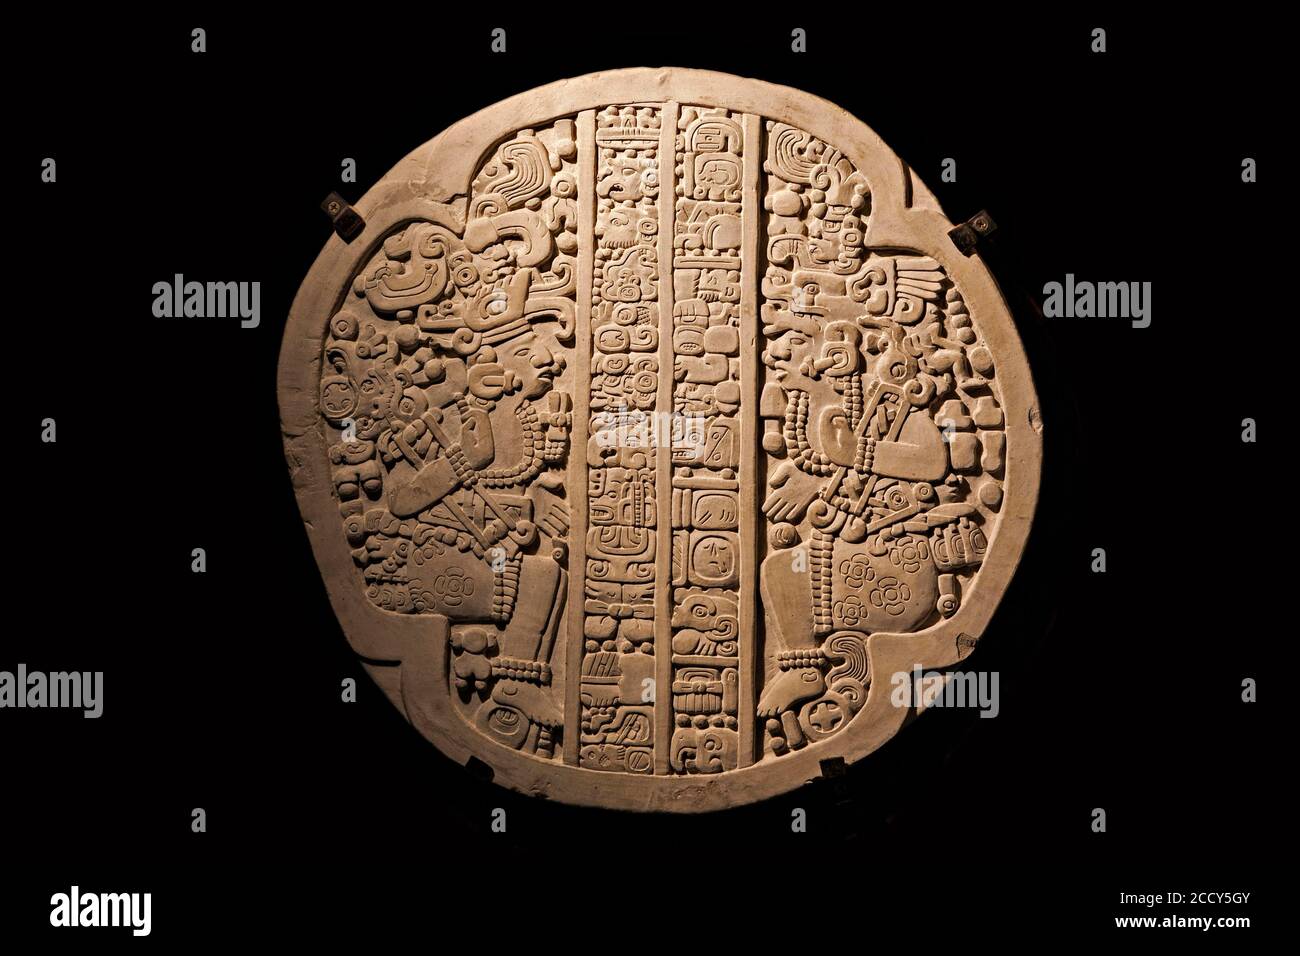 Marker Disc found in Funerary Chamber in CopaÌn archeological site, Archeological Museum, Copan Ruinas, Honduras Stock Photo